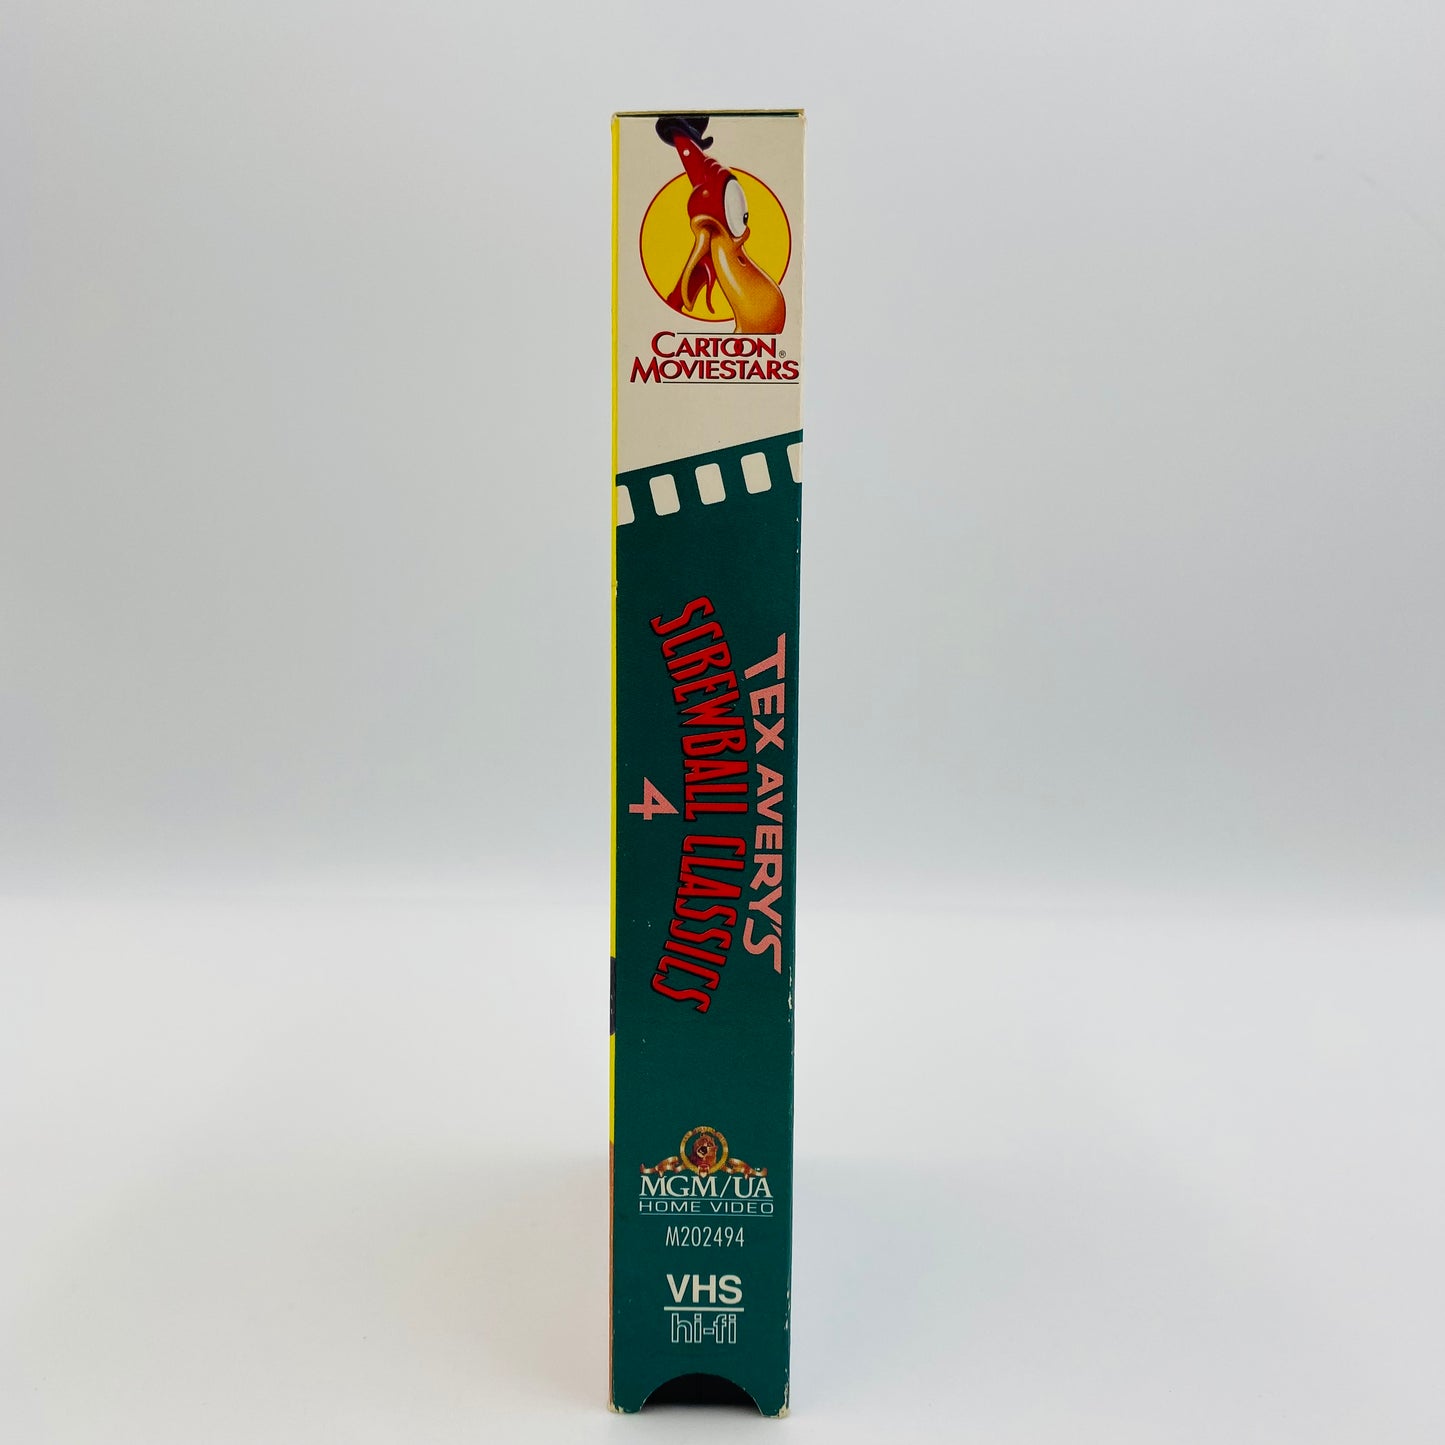 Tex Avery’s Screwball Classics volumes 1-4 VHS tapes (1988, 1989, 1991, 1992) MGM/UA Home Video